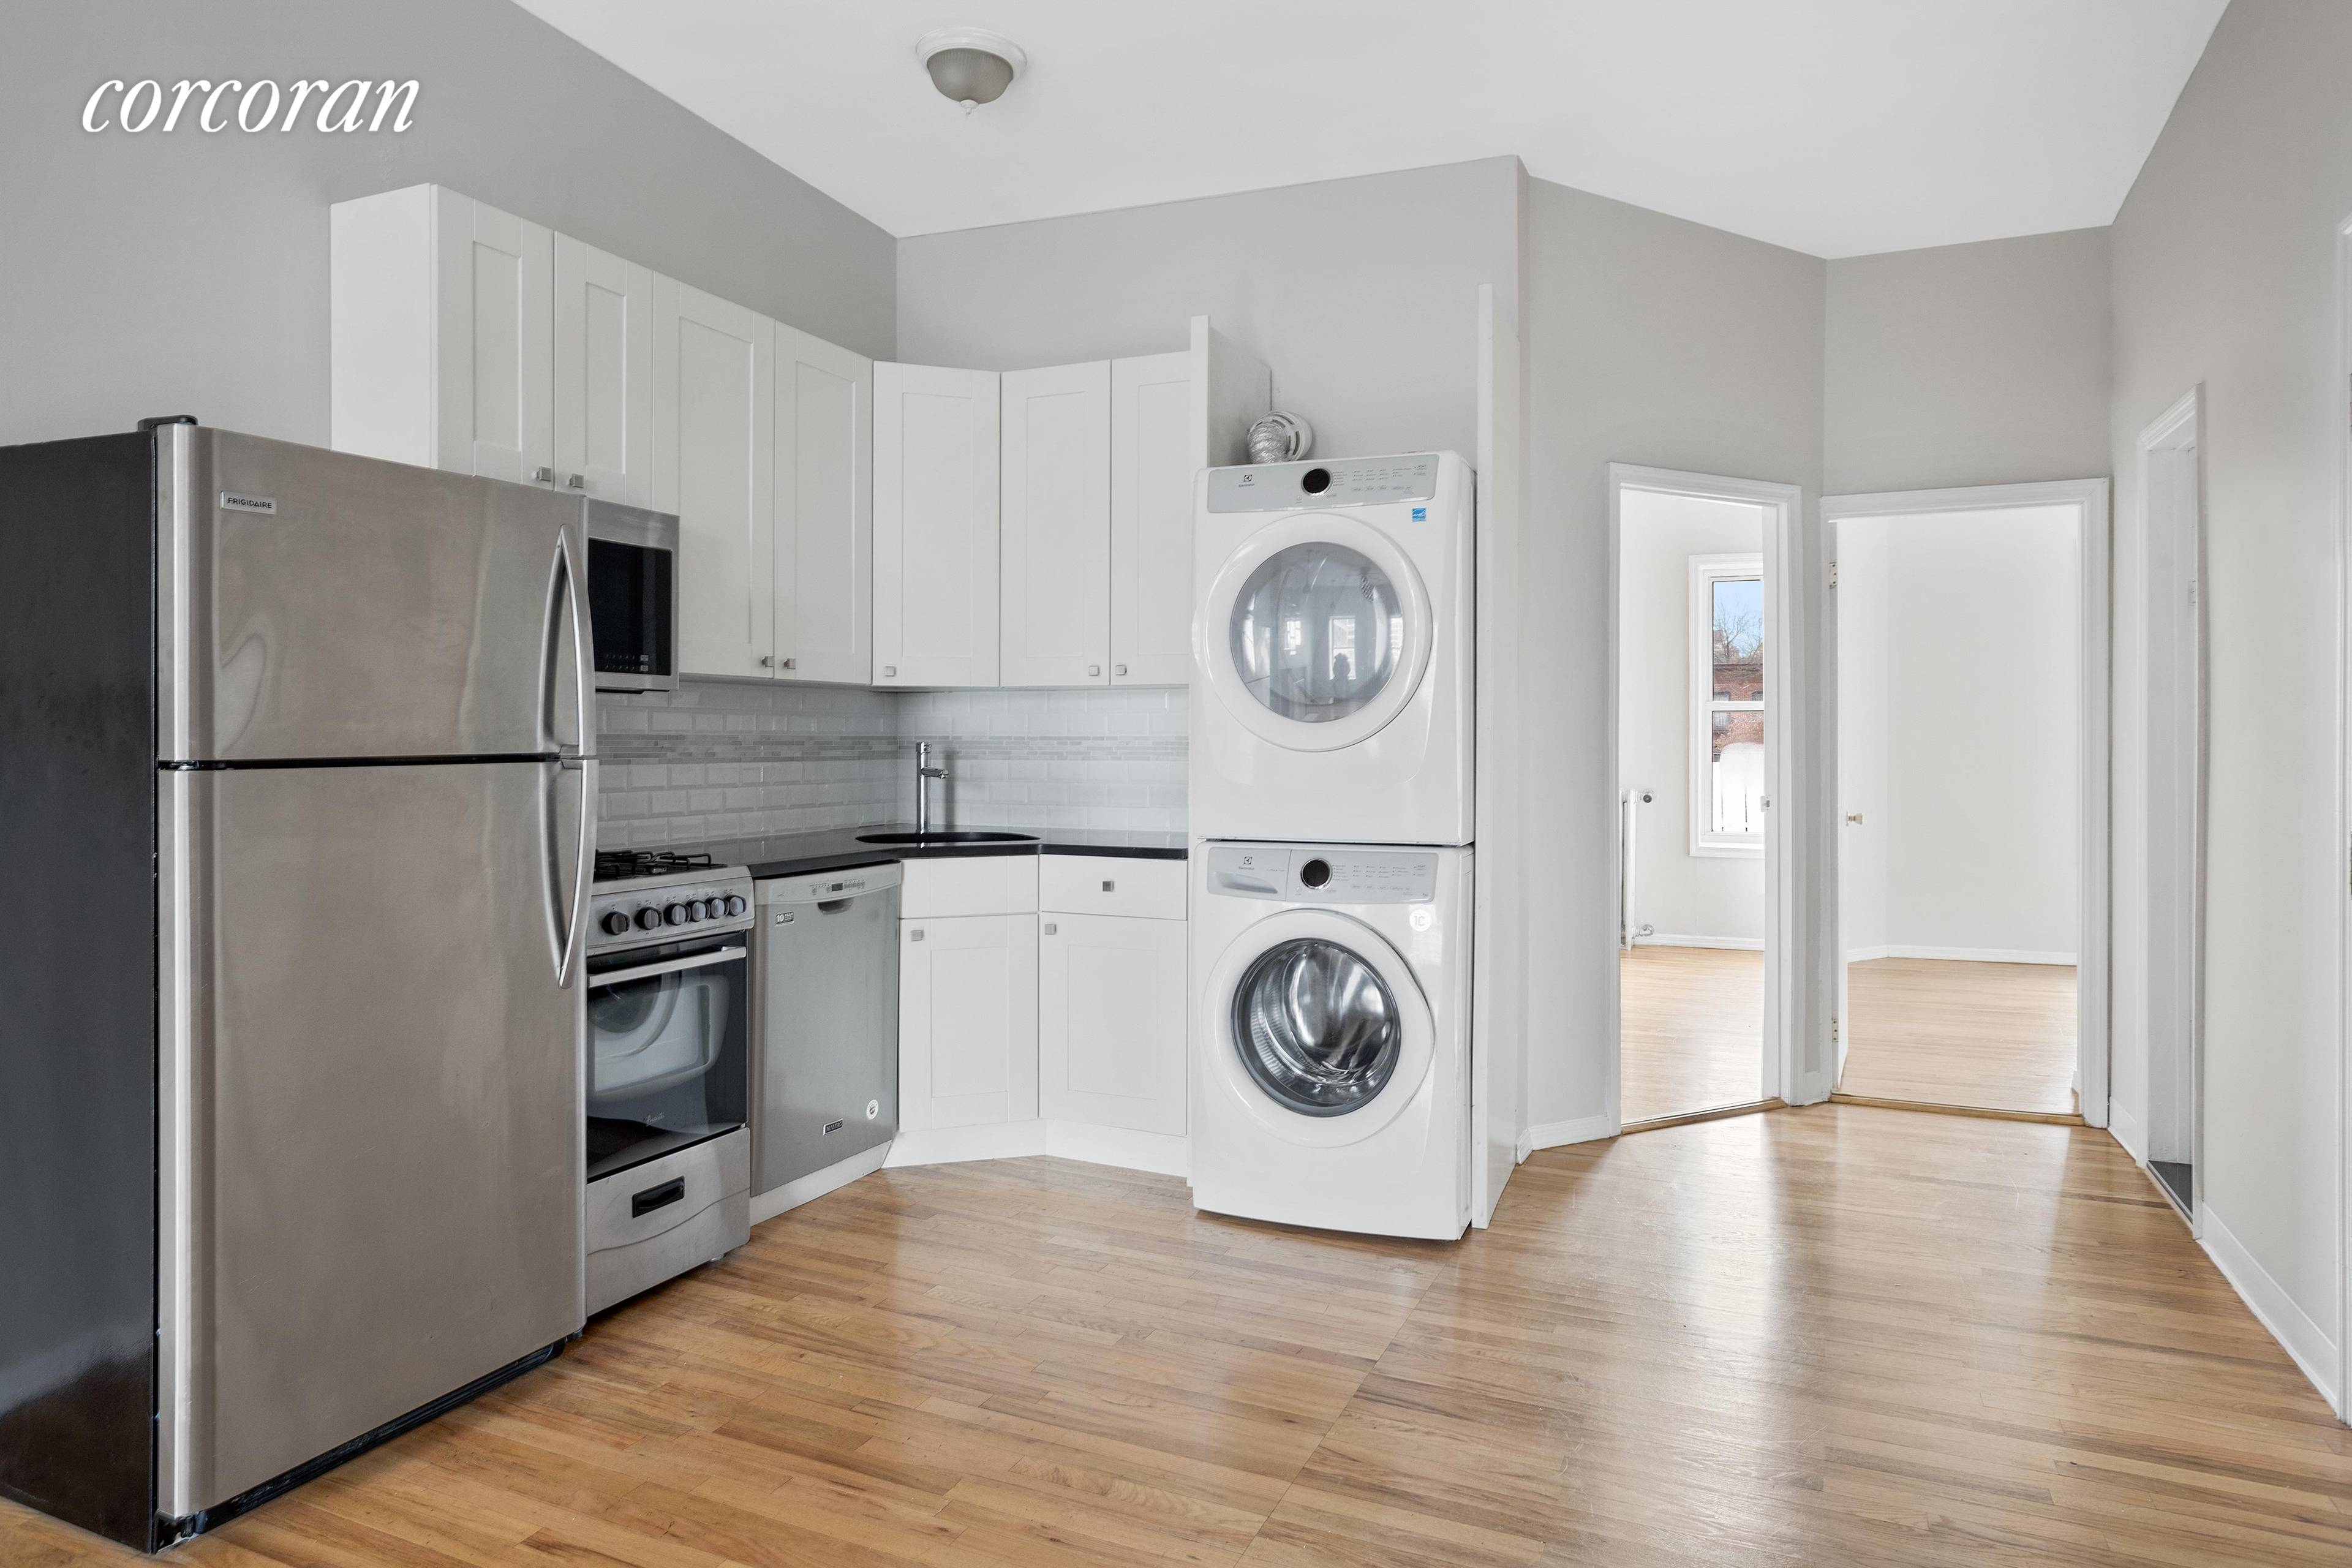 Fabulous three family home only minutes away from the Barclays center !